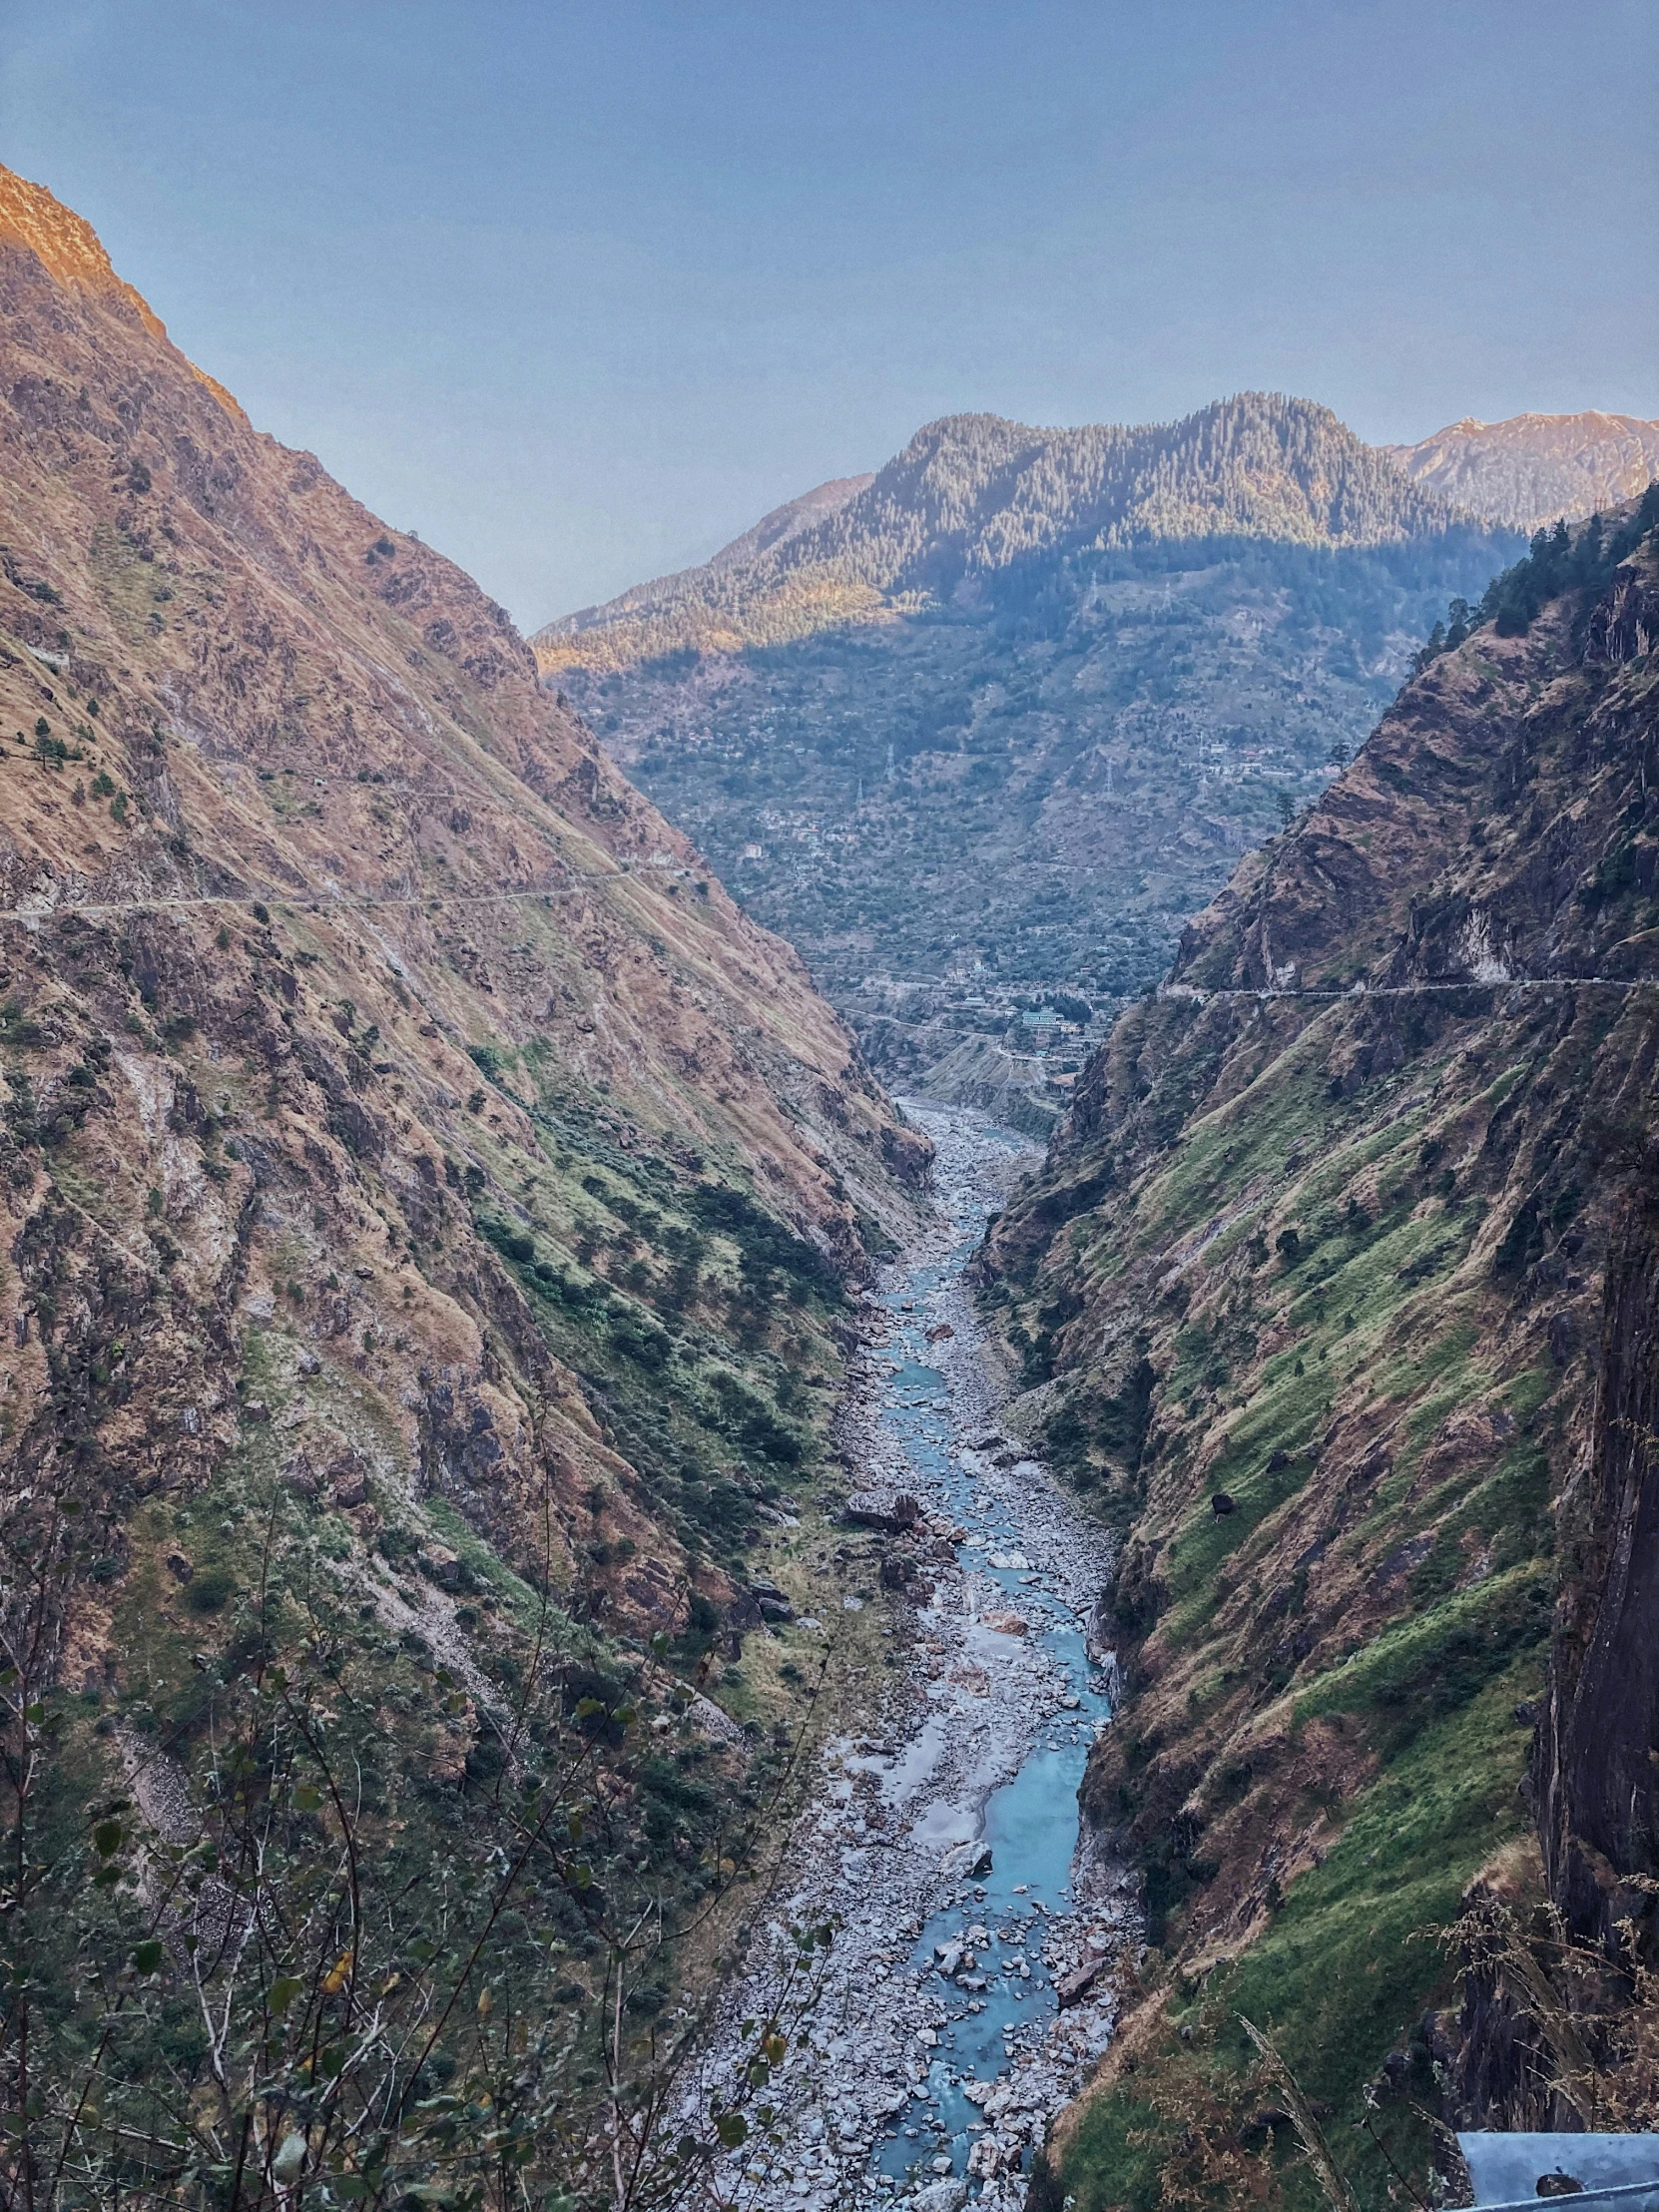 the view of a large river in a canyon